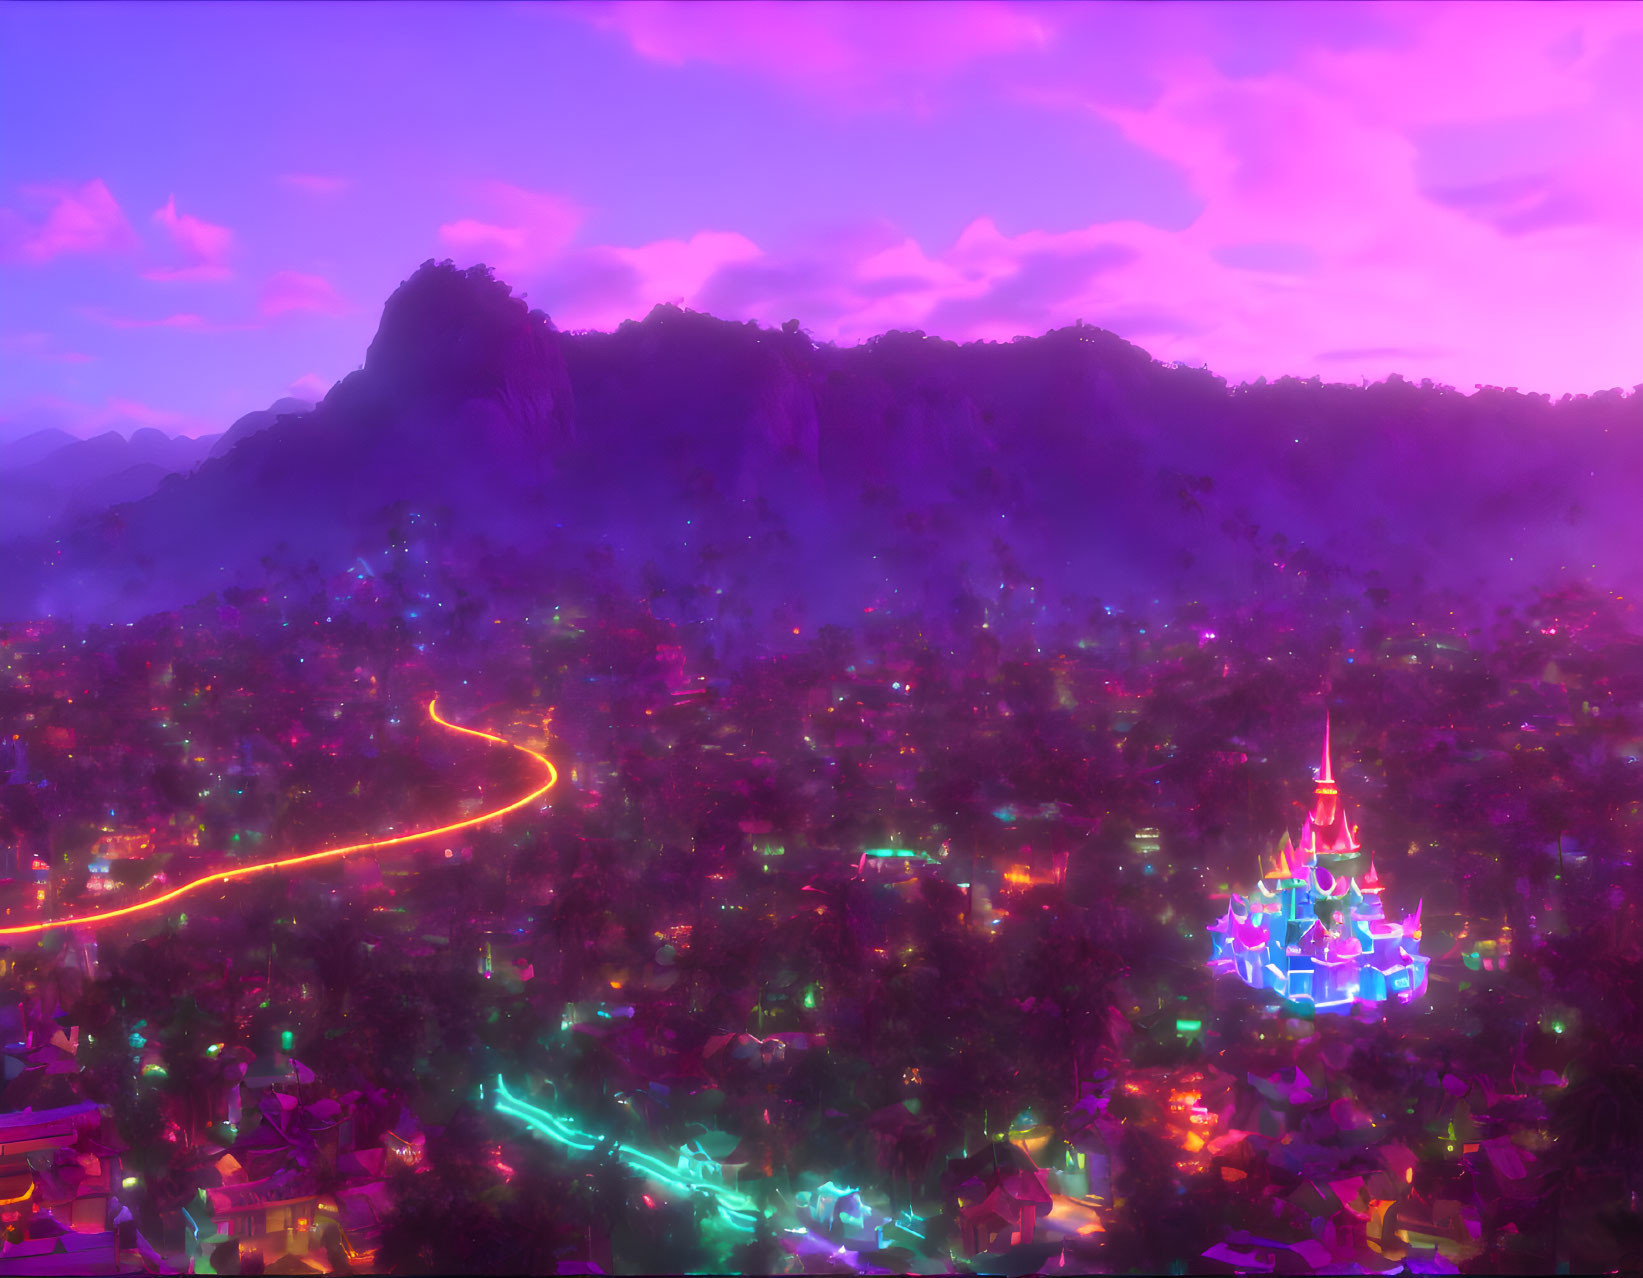 Fantastical landscape with neon colors, castle, and colorful forest path